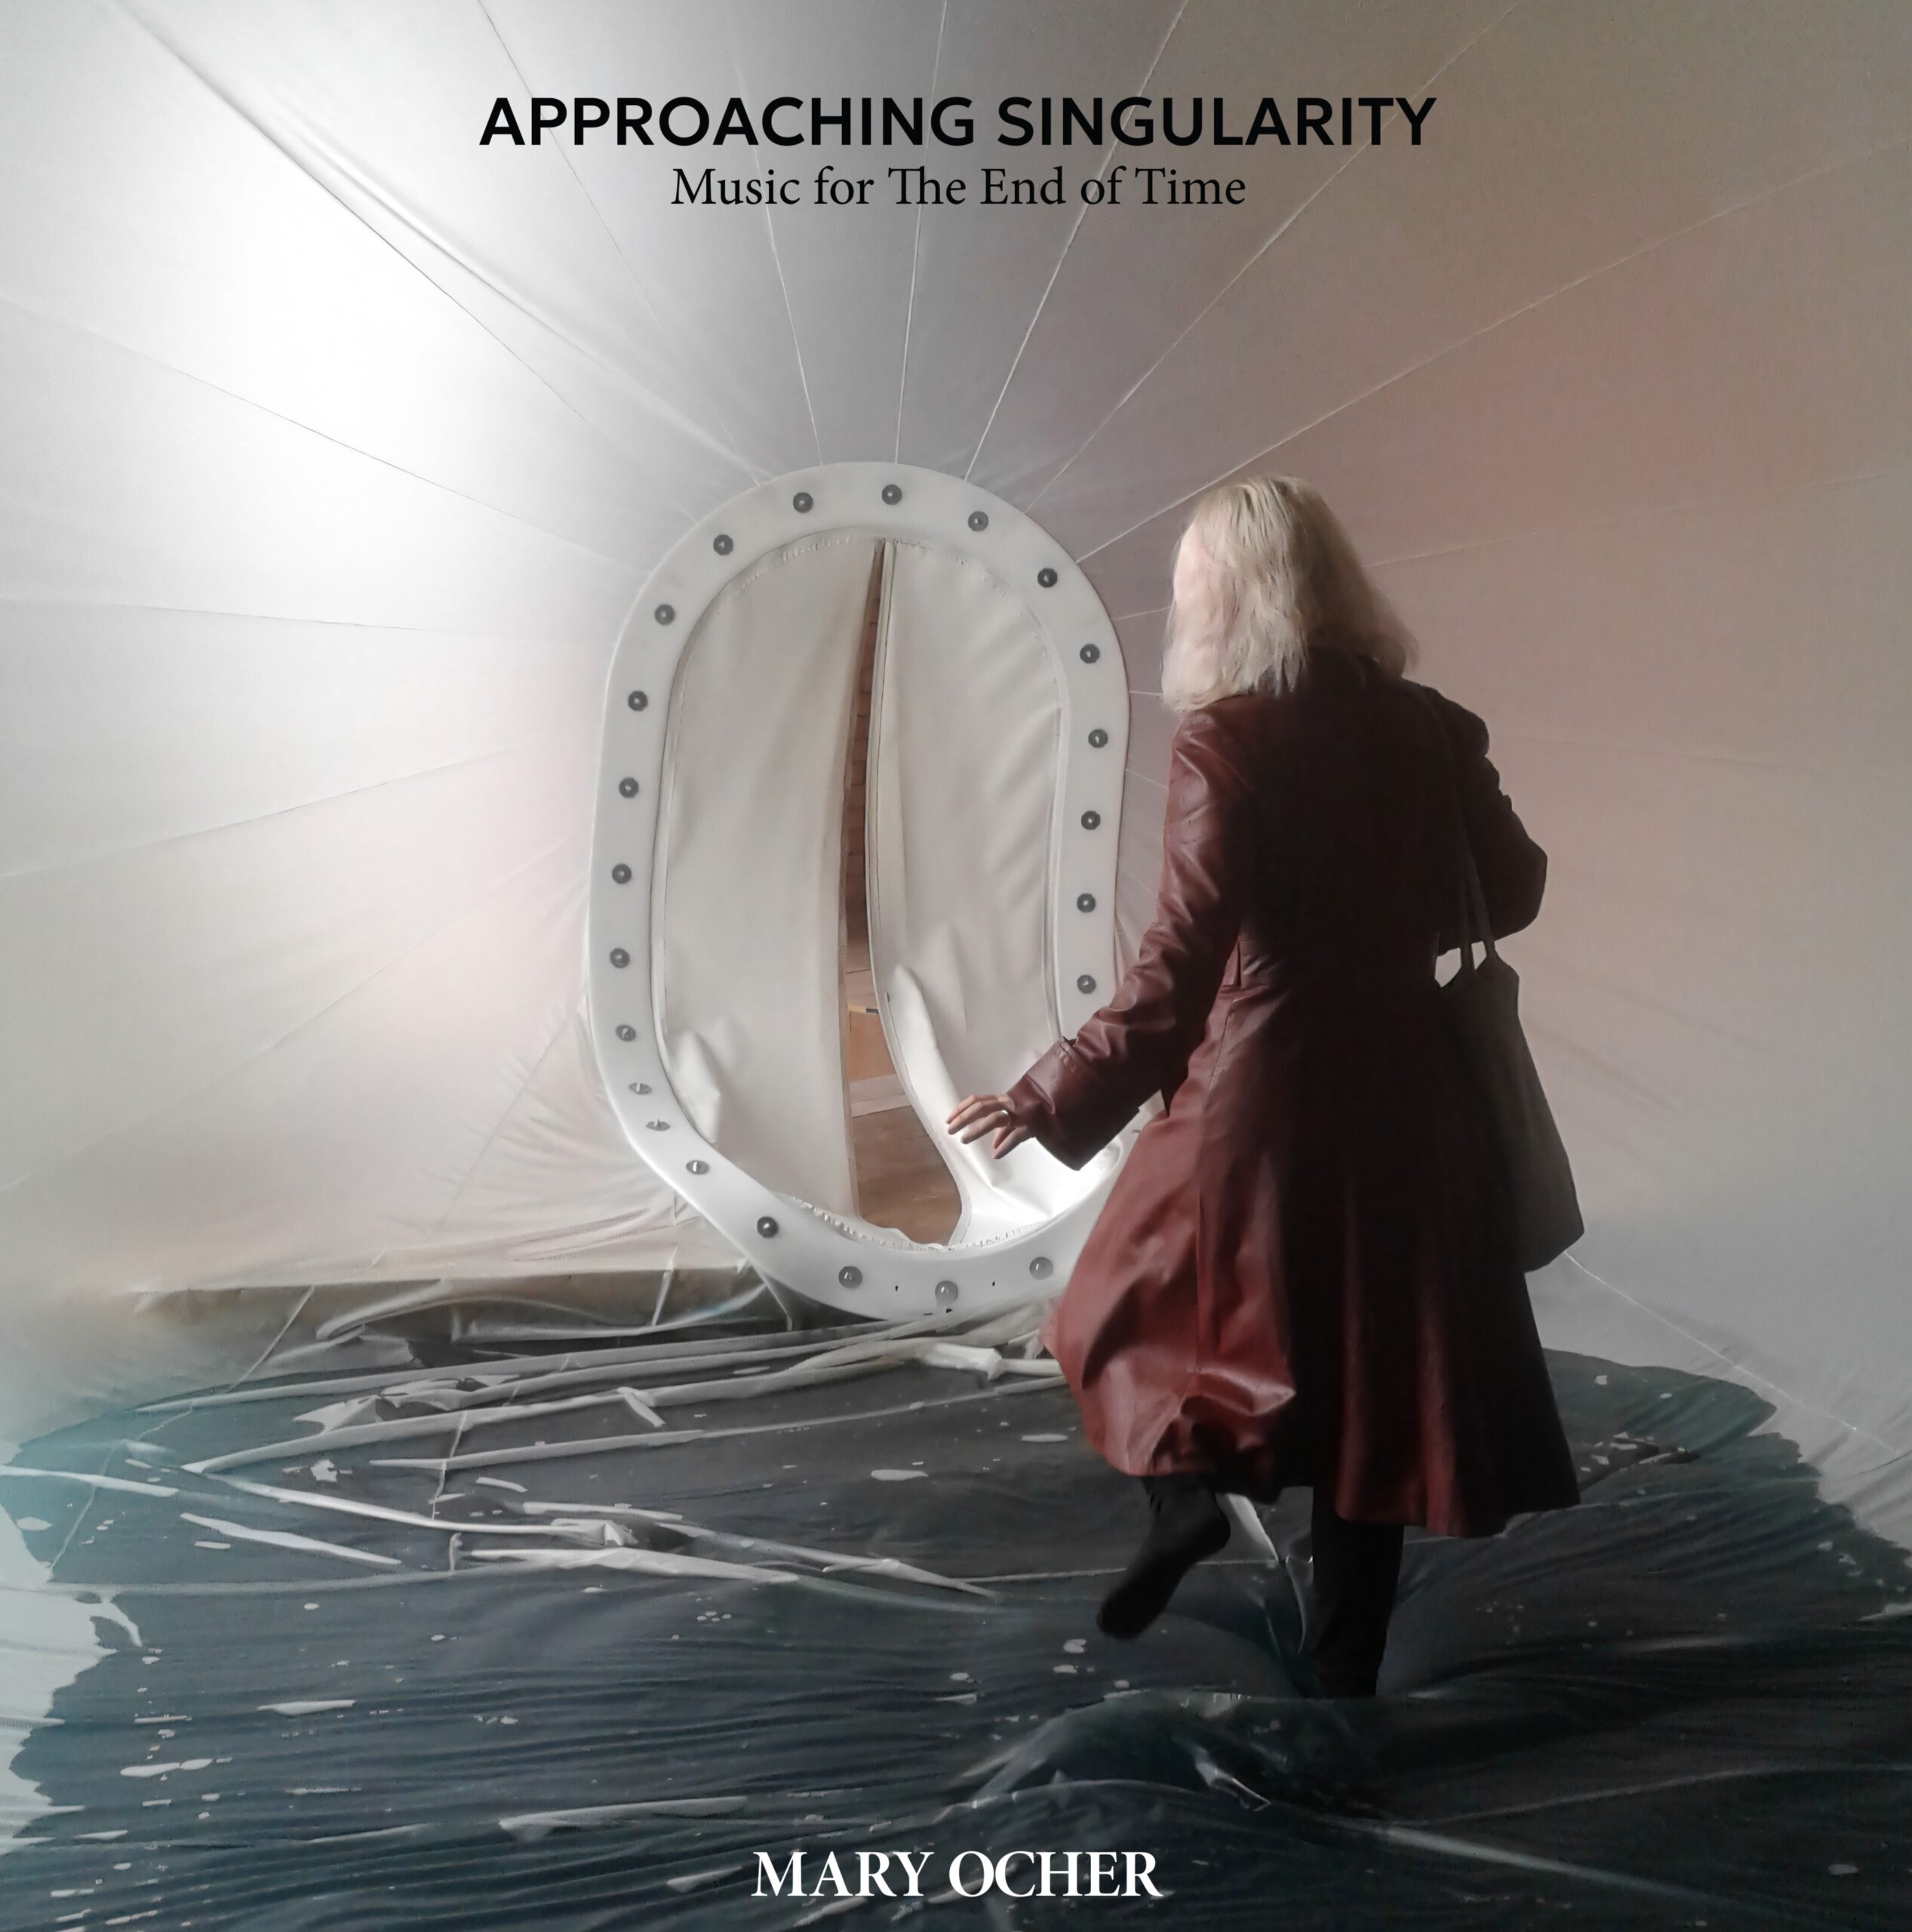 Approaching Singularity: Music for The End of Time